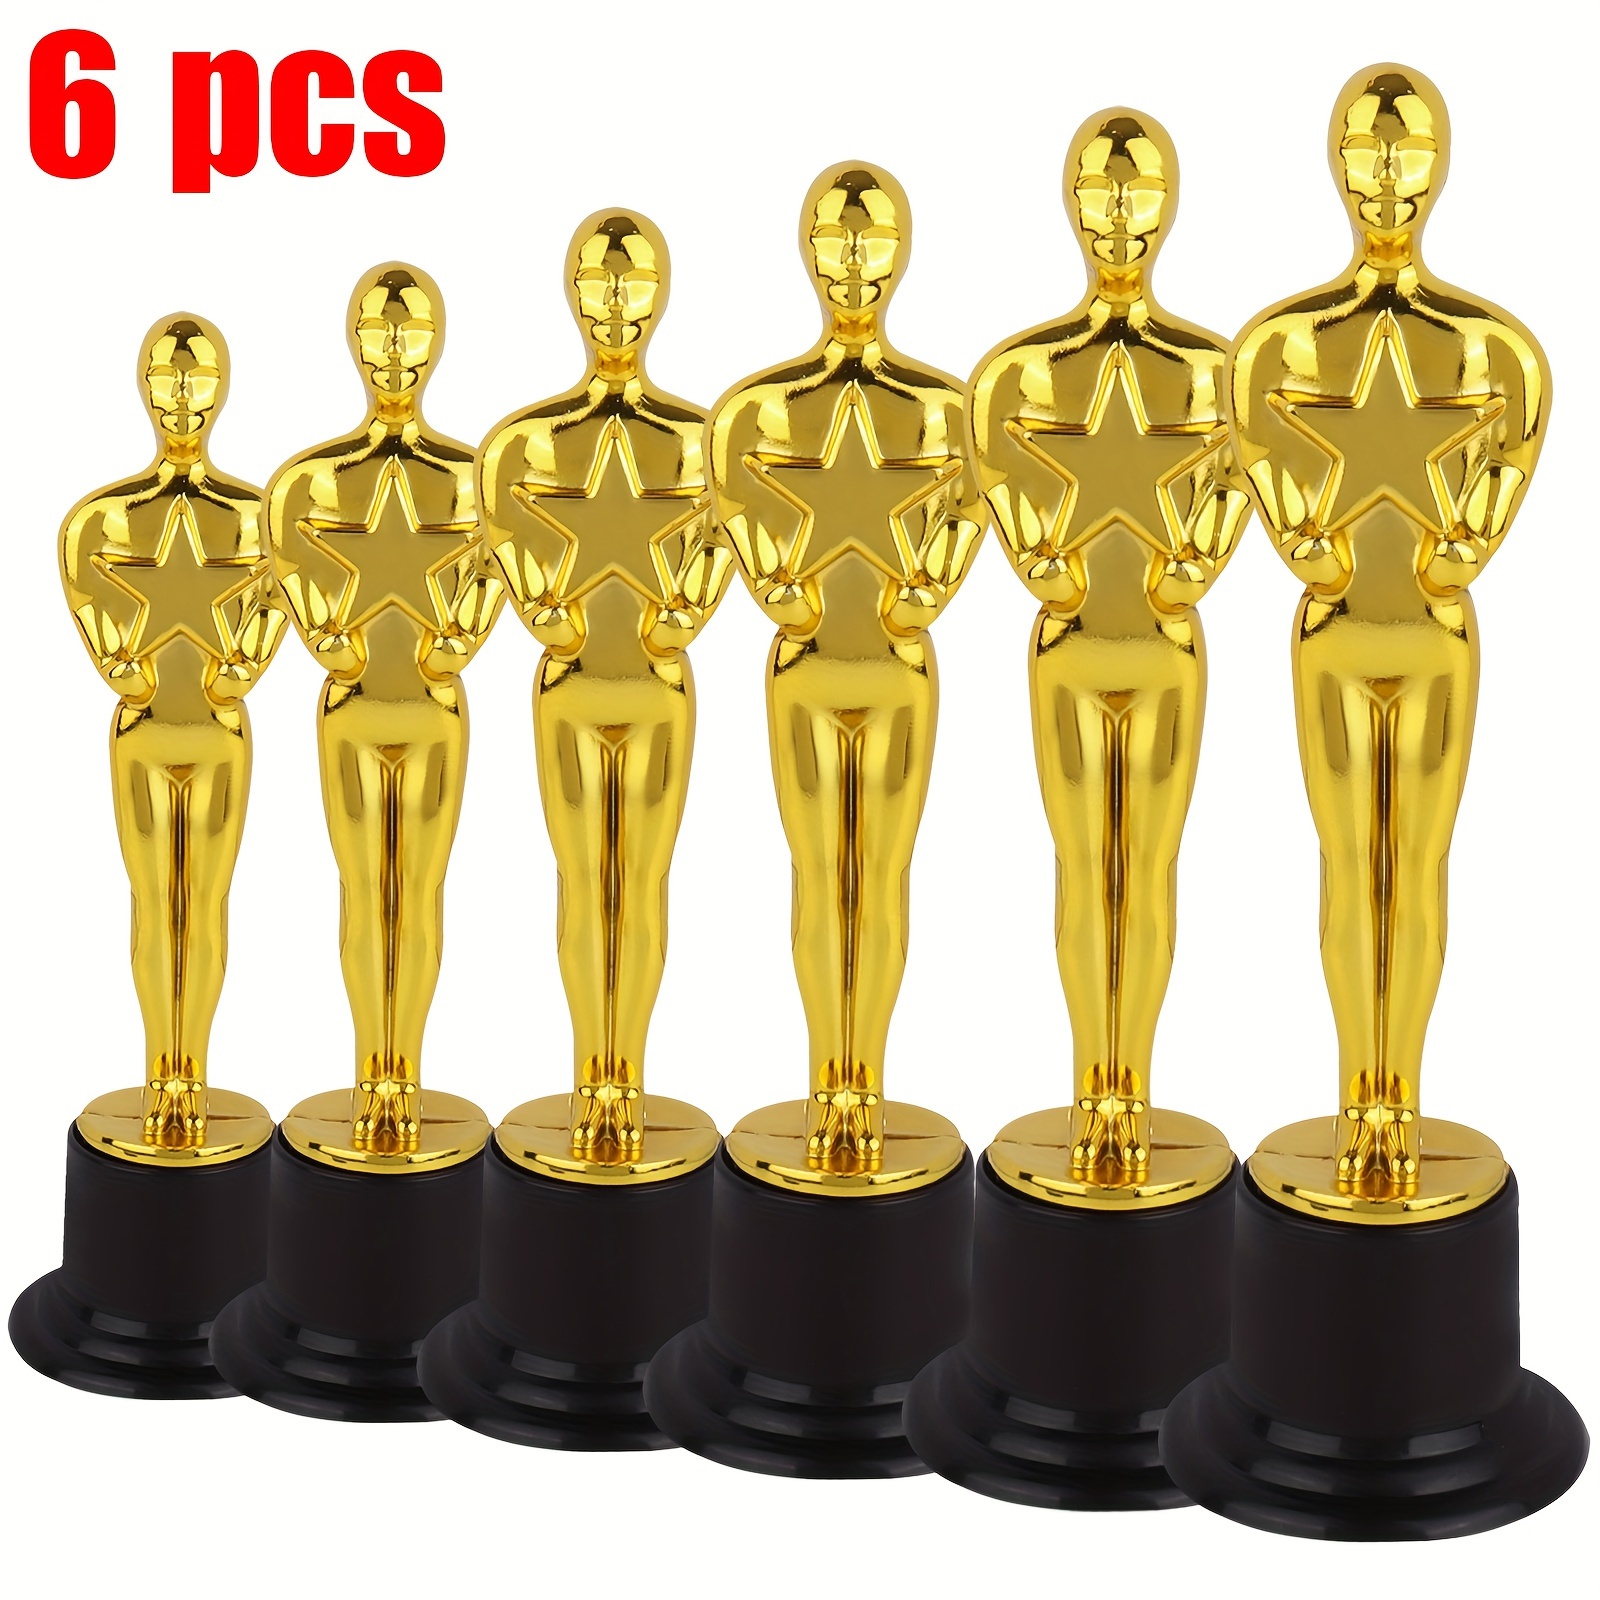 

6pcs, 6in Golden Award Trophies, Golden Statues Party Award Trophy, Party Decorations And Appreciation Gifts